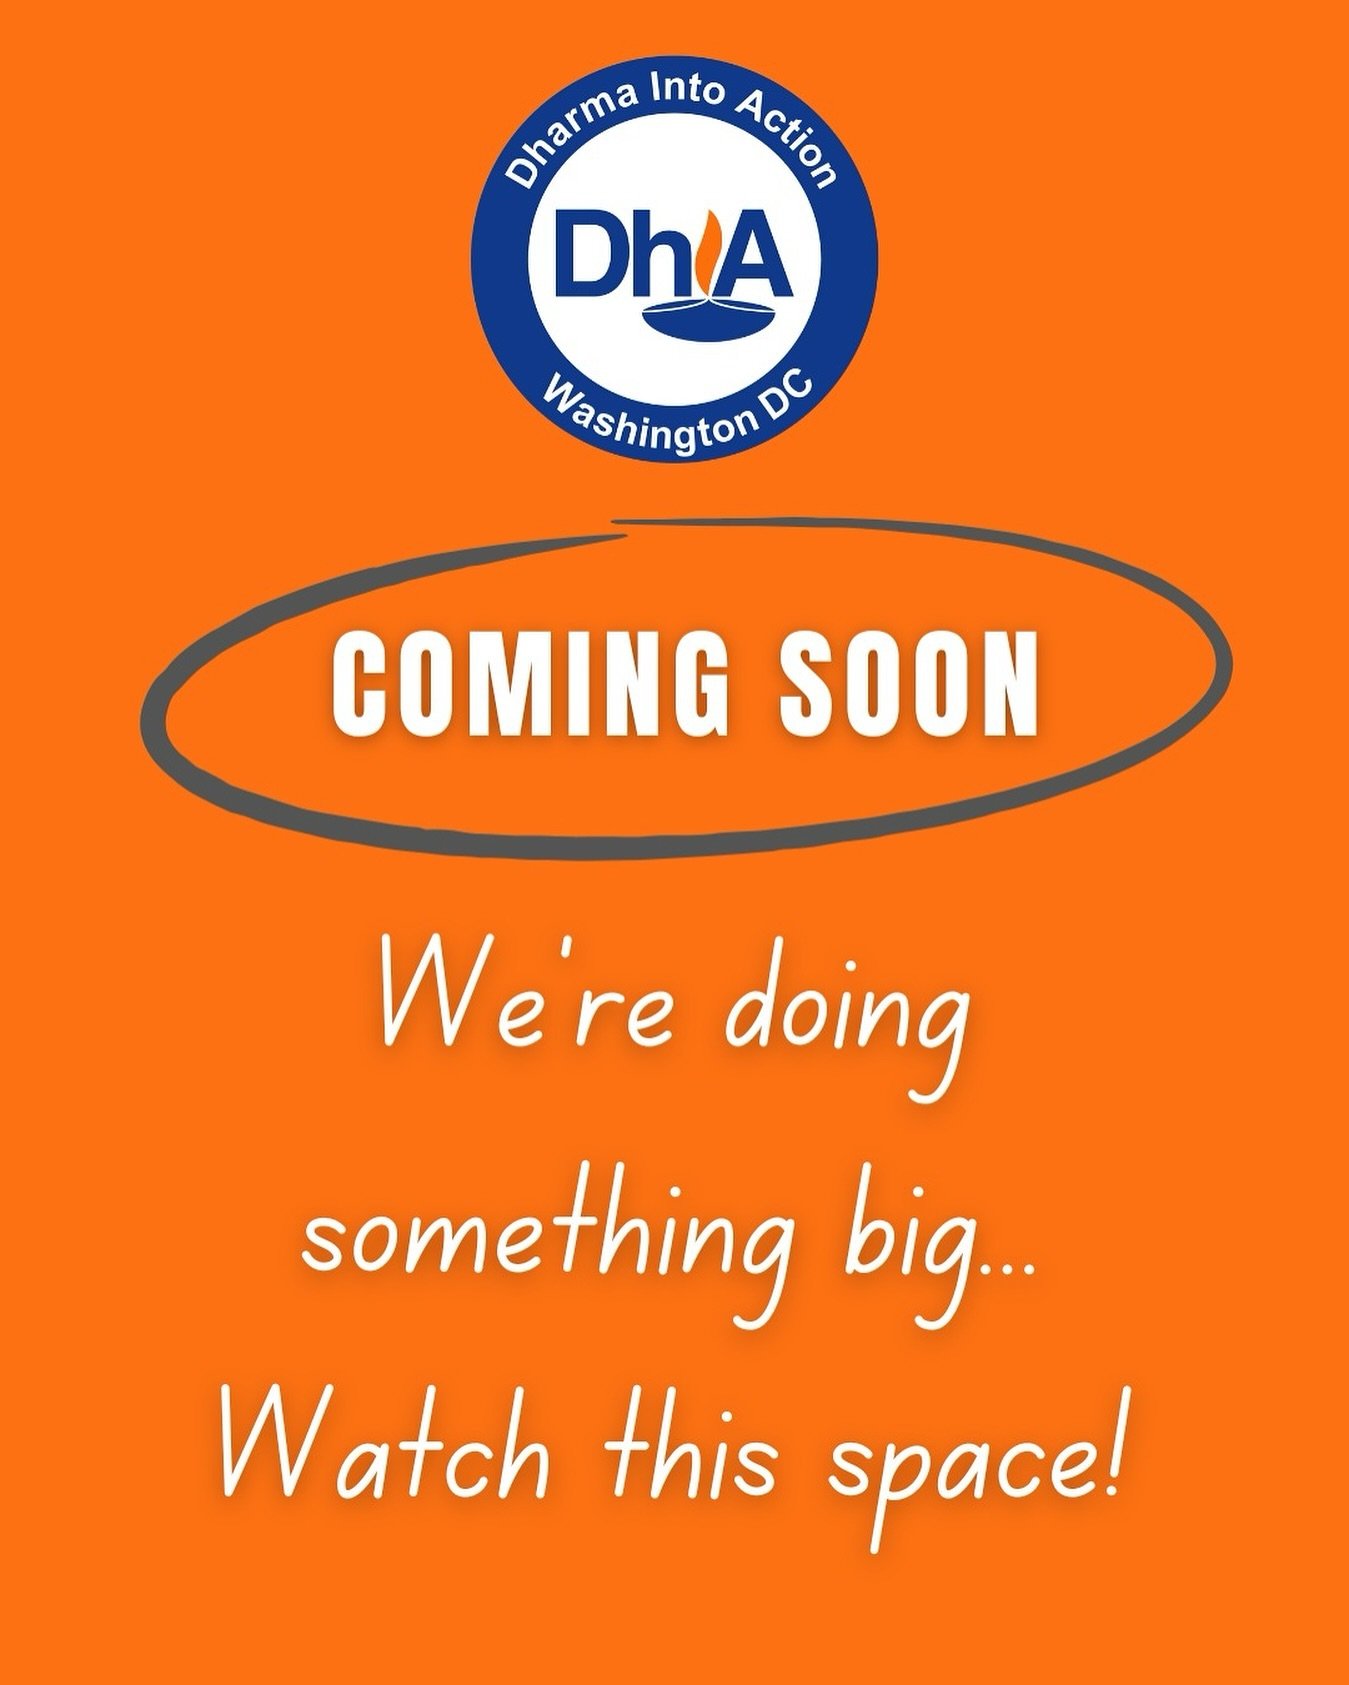 📢 Exciting News Alert! 📢

Get ready, because the DhIA Foundation has something new in store! Stay tuned for an upcoming announcement that promises to make a positive impact. Keep your eyes peeled for updates &ndash; you won&rsquo;t want to miss thi